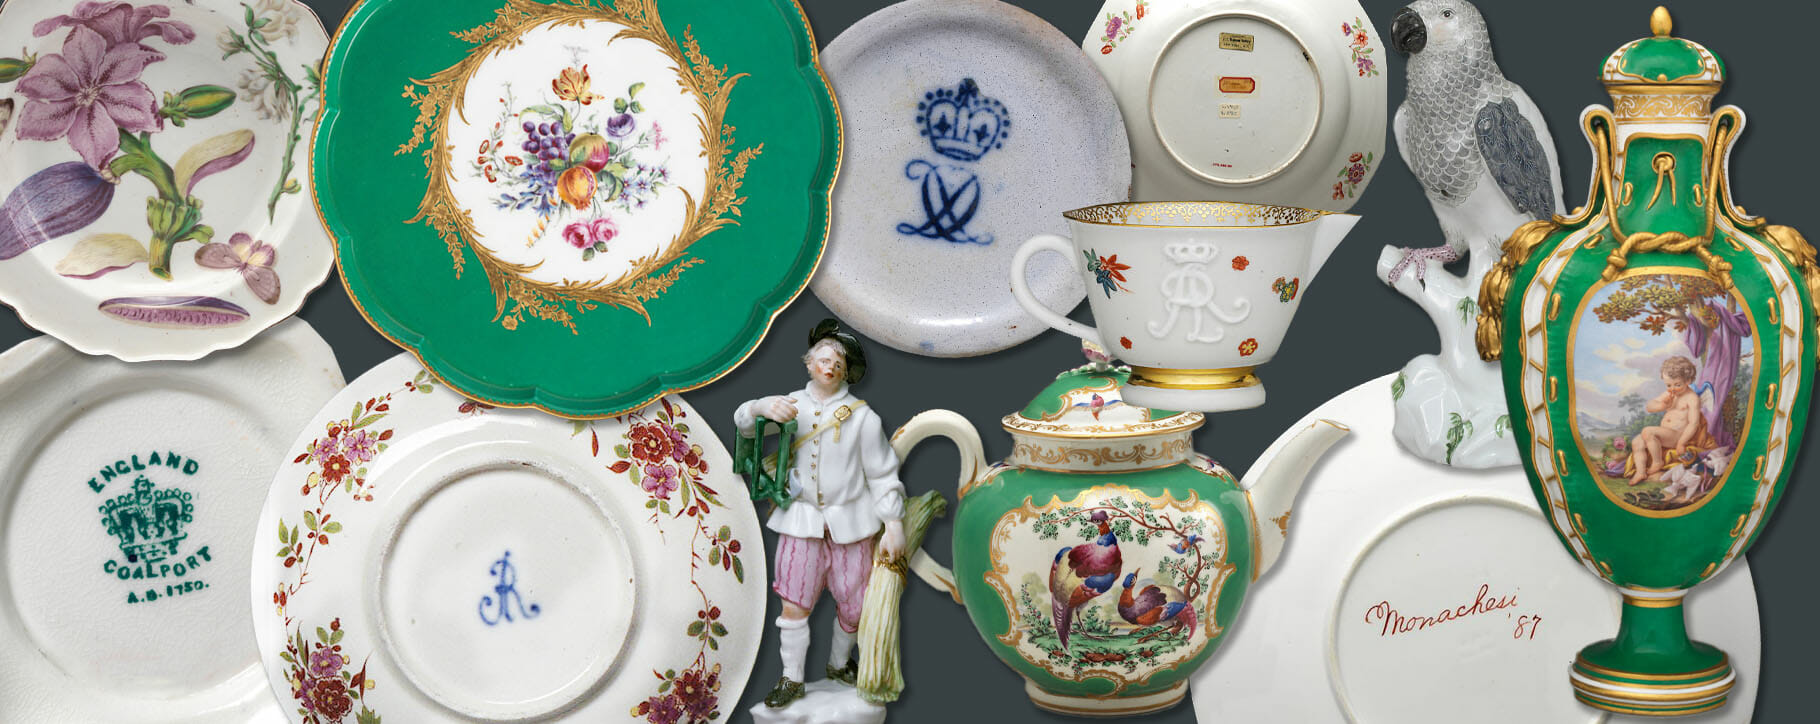 Antique porcelain valuation: analysing maker's marks and colours